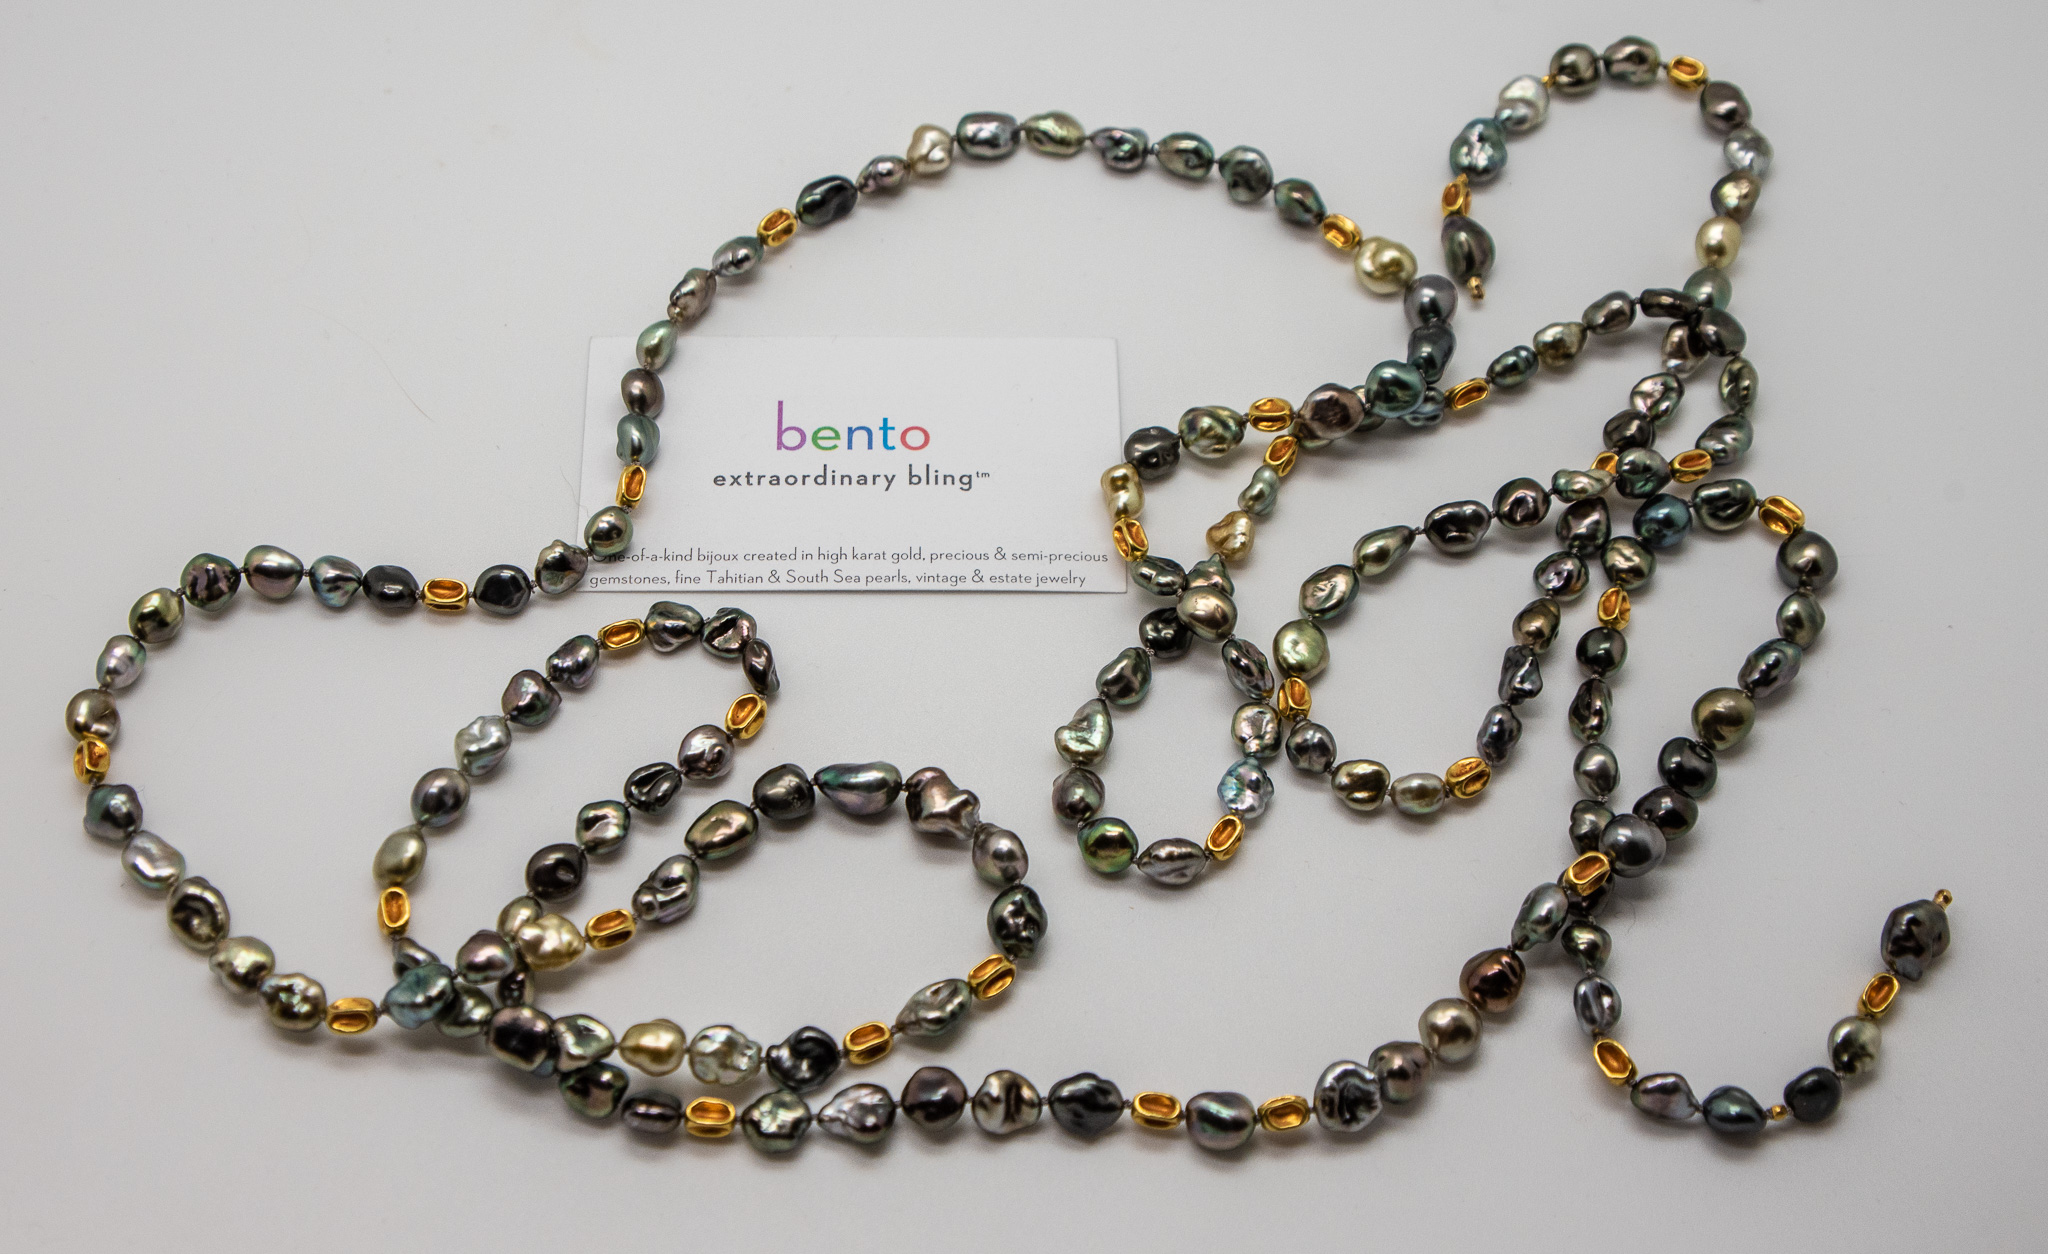 Eighty-five inches of Tahitian pearl bliss - Keshi pearls with 18K gold accent beads and bento signature clasp